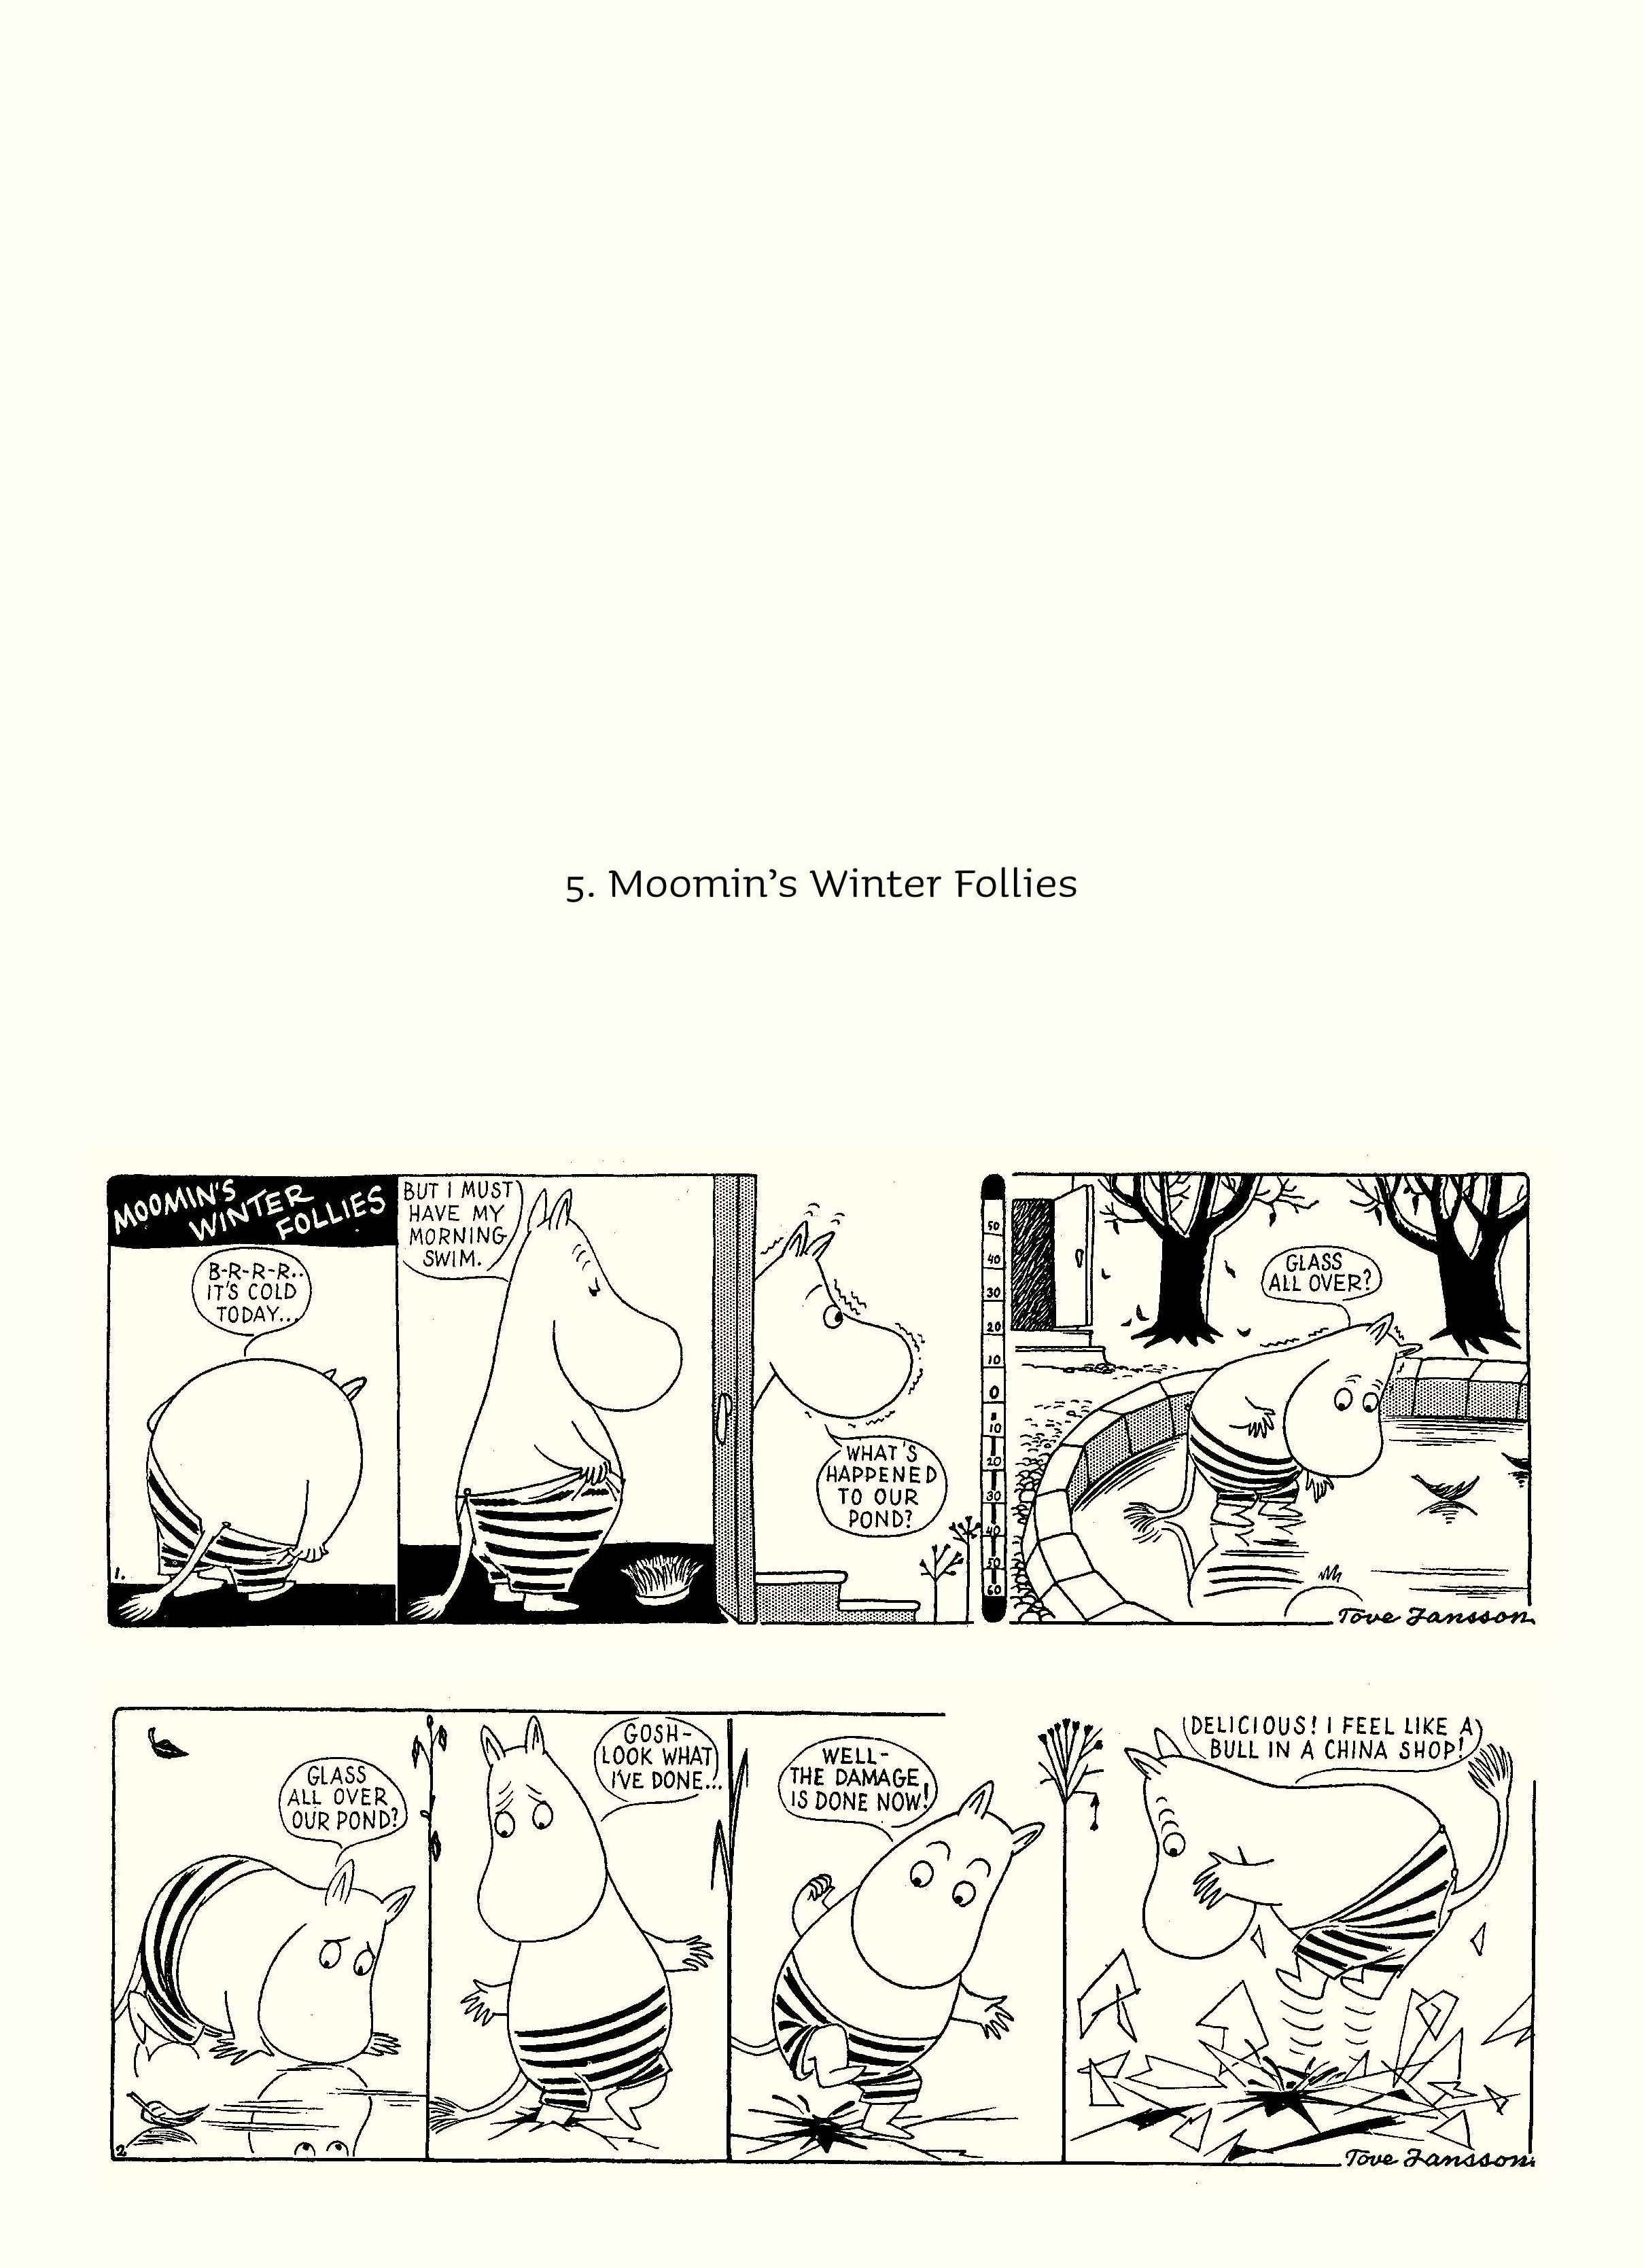 Read online Moomin: The Complete Tove Jansson Comic Strip comic -  Issue # TPB 2 - 6